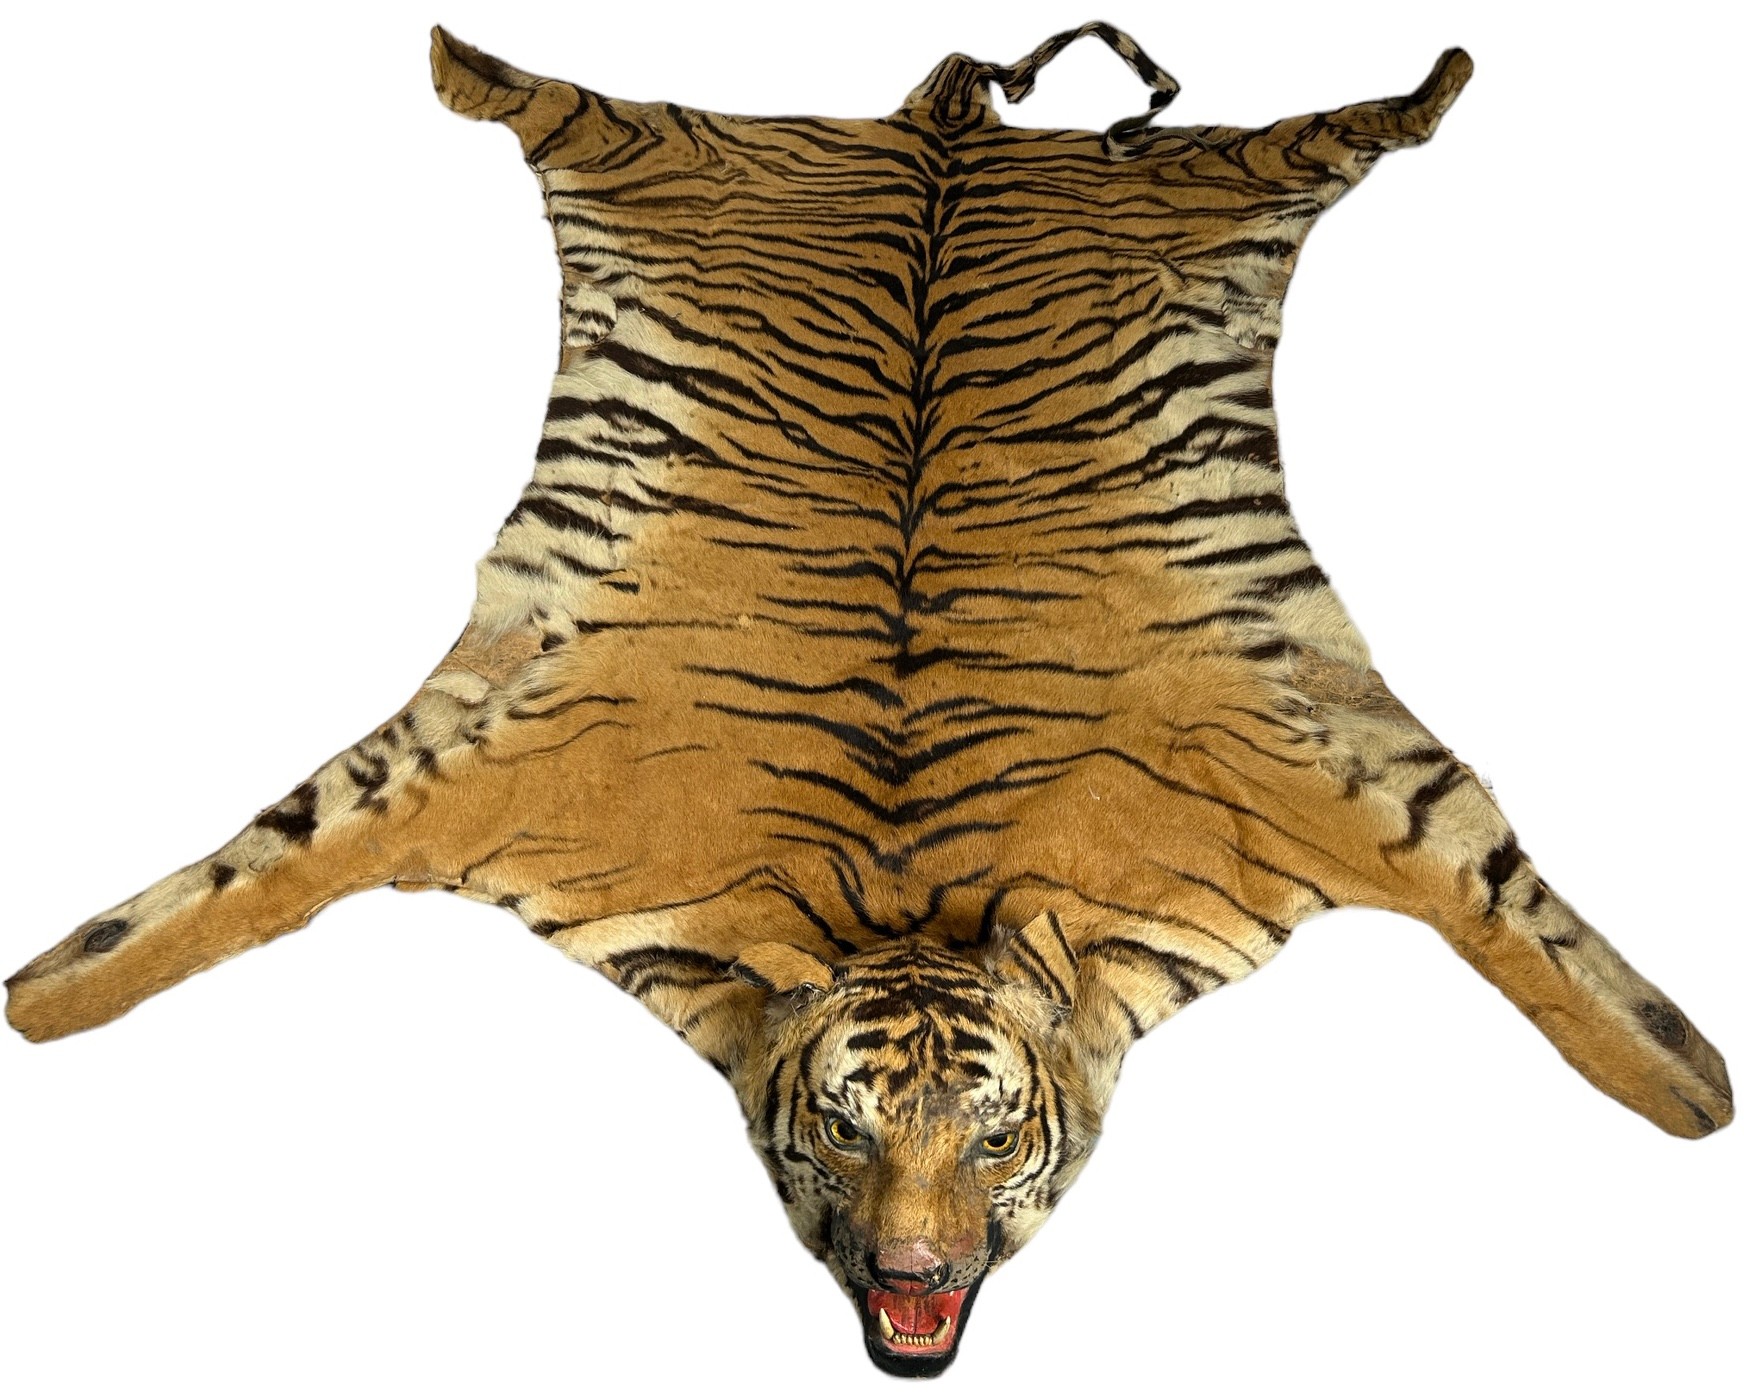 A LARGE TIGER SKIN RUG CIRCA 1930, see photo of rug beneath the family dinner table. 240cm head to